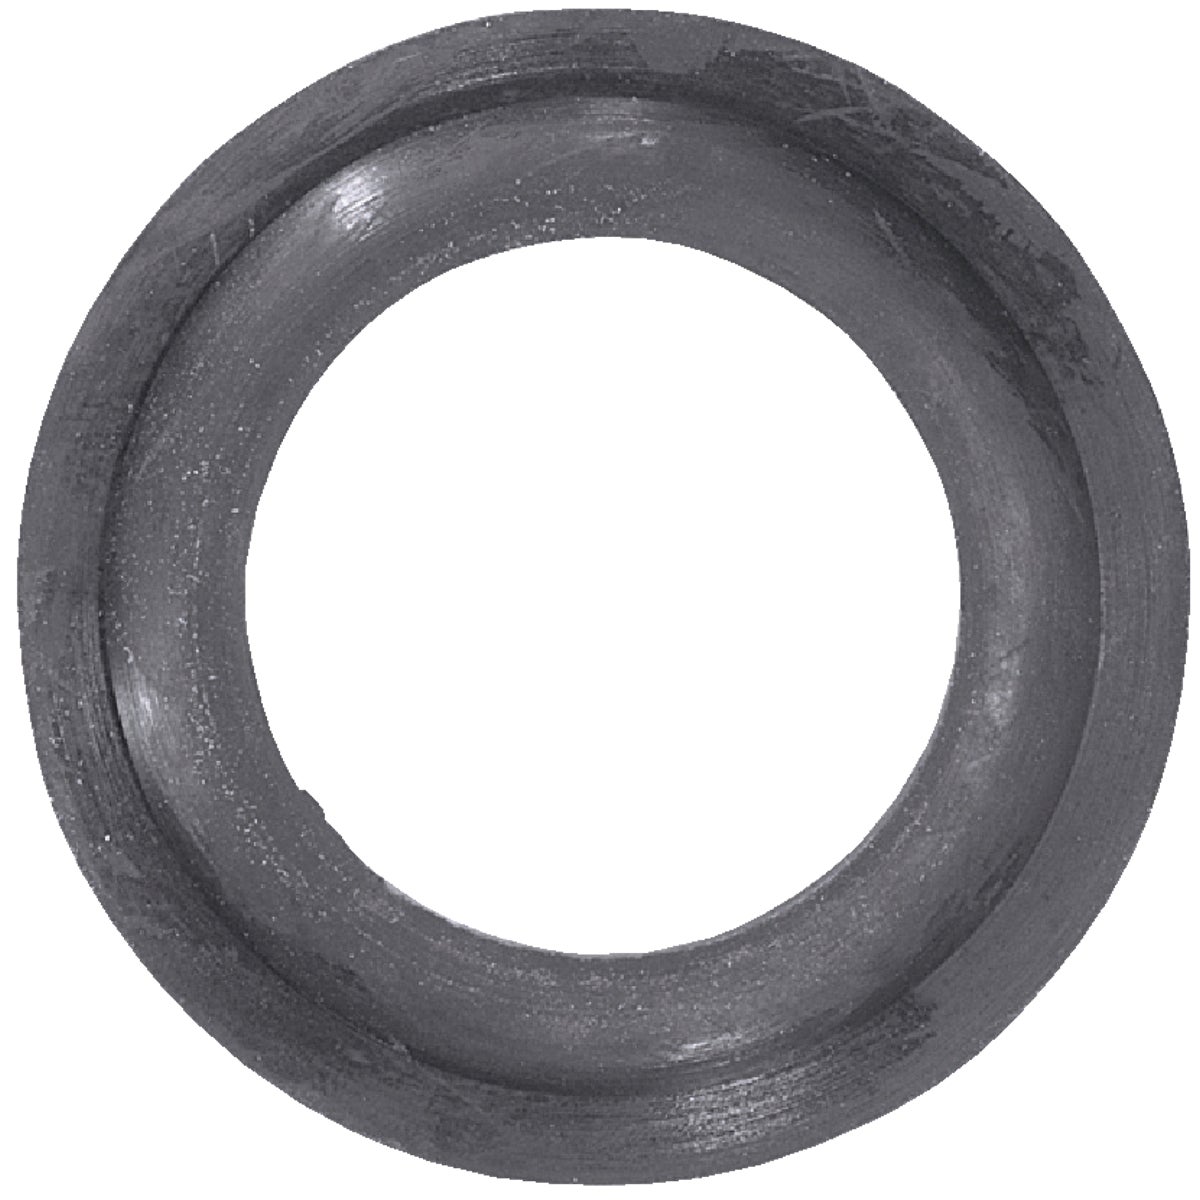 Item 431087, Replacement rubber washer for dielectric unions, 1-5/32" O.D. x 7/8" I.D.